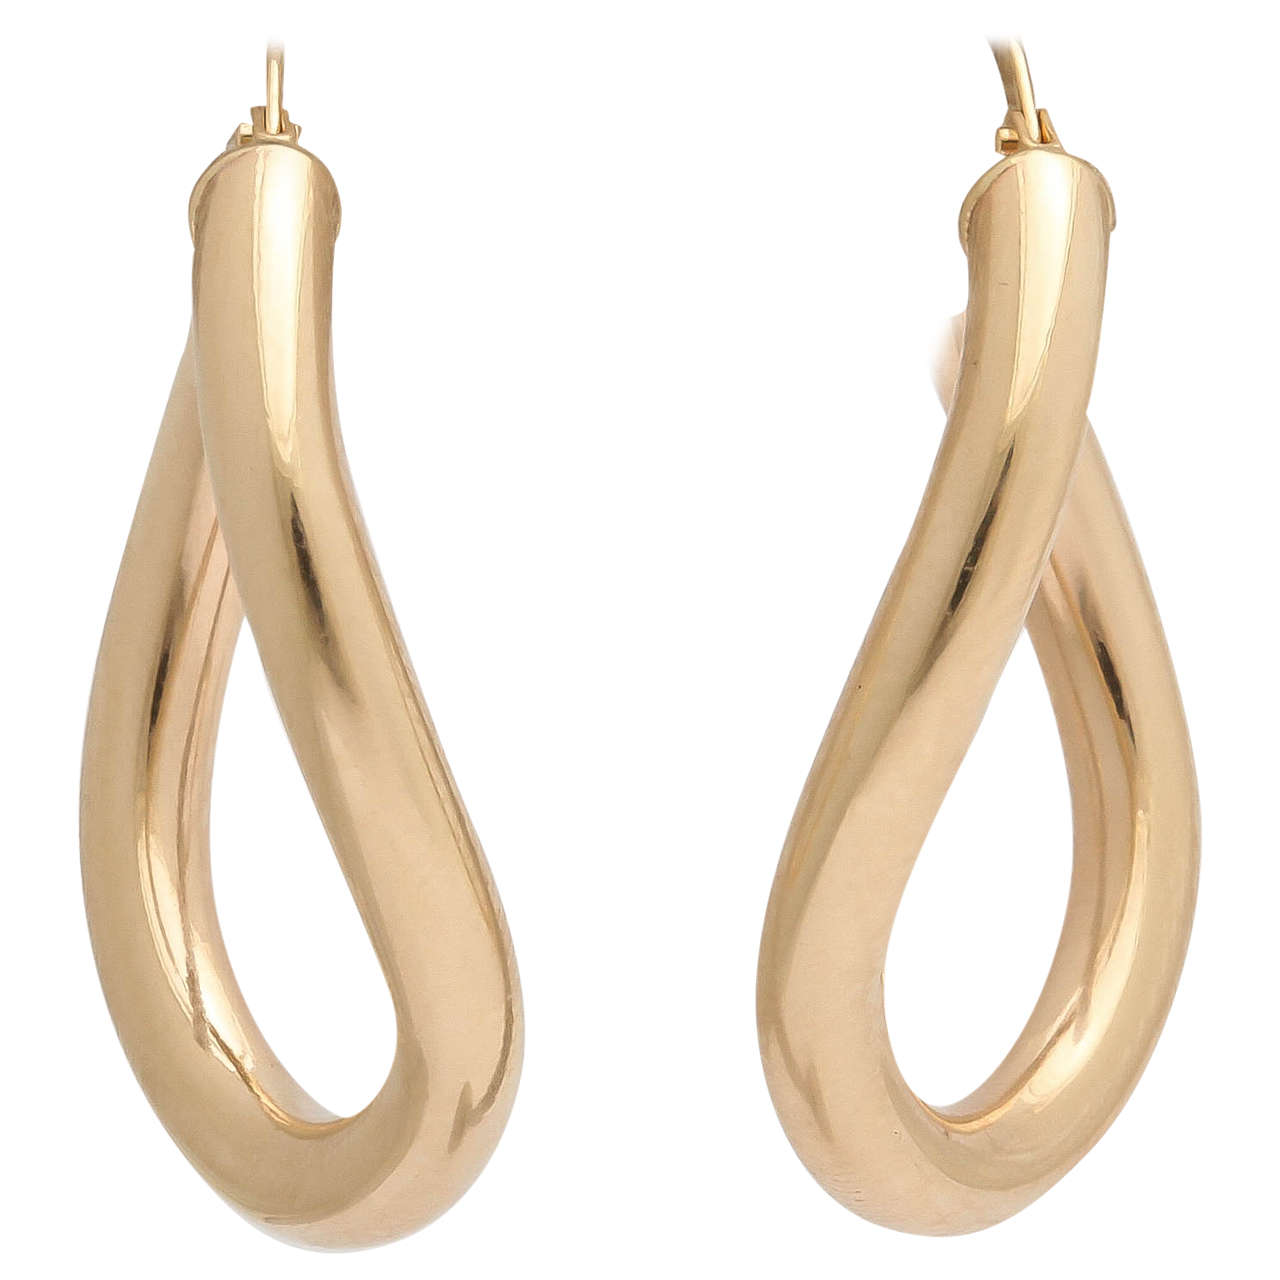 18K Italian yellow gold small twisted wave earrings from Faraone Mennella's 